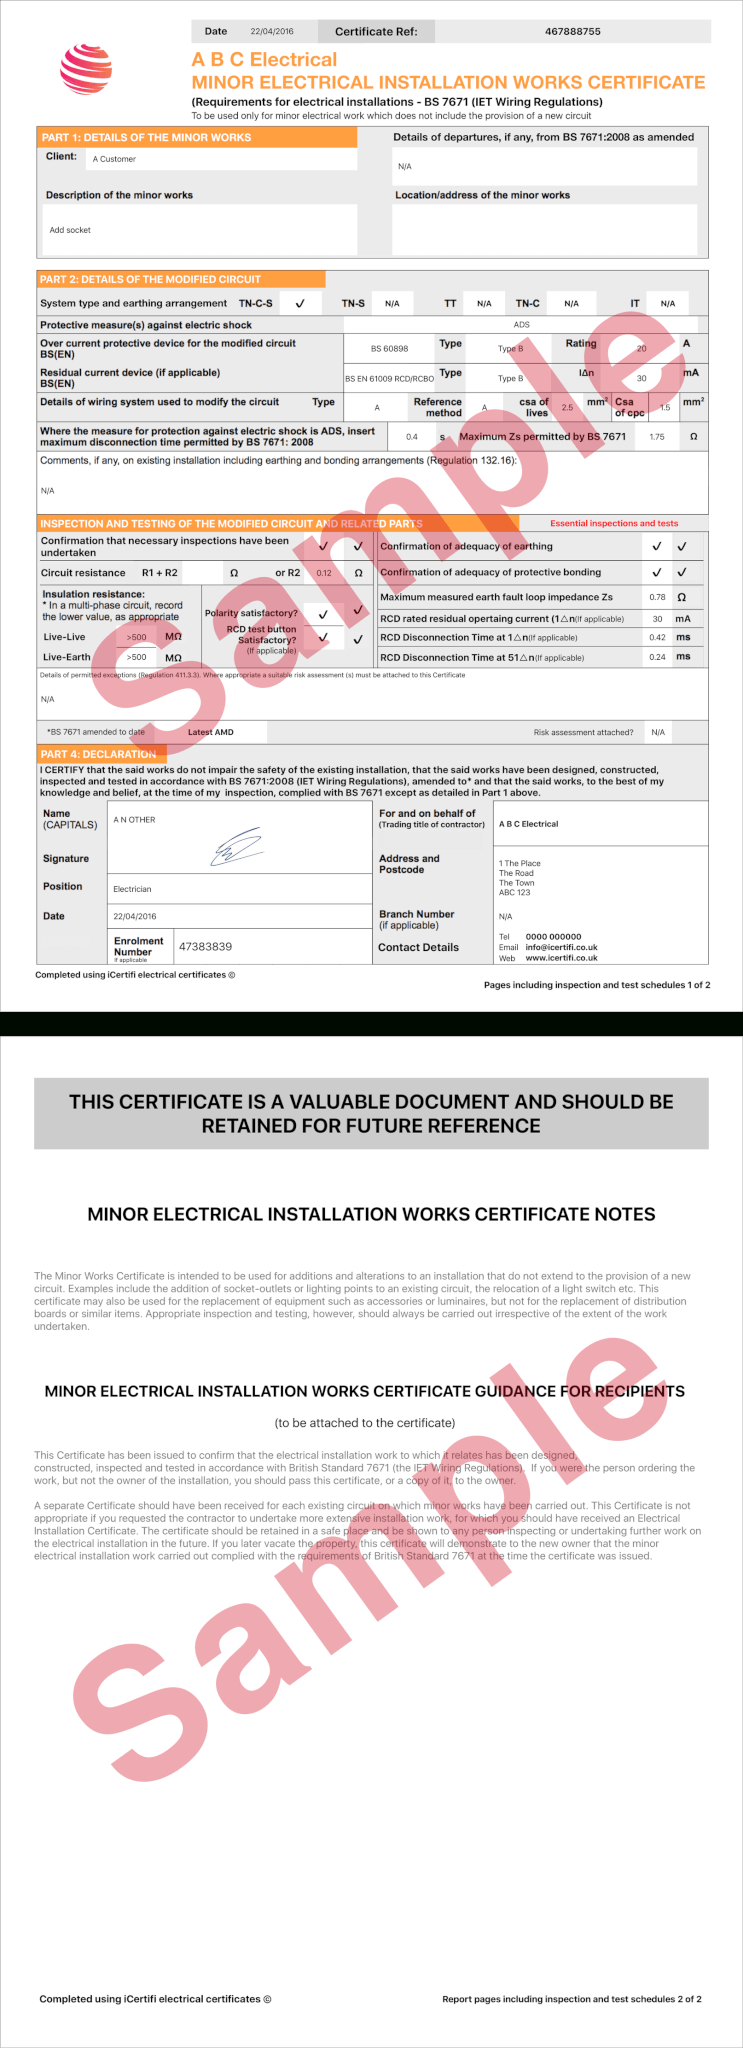 Electrical Certificate - Example Minor Works Certificate Inside Electrical Minor Works Certificate Template